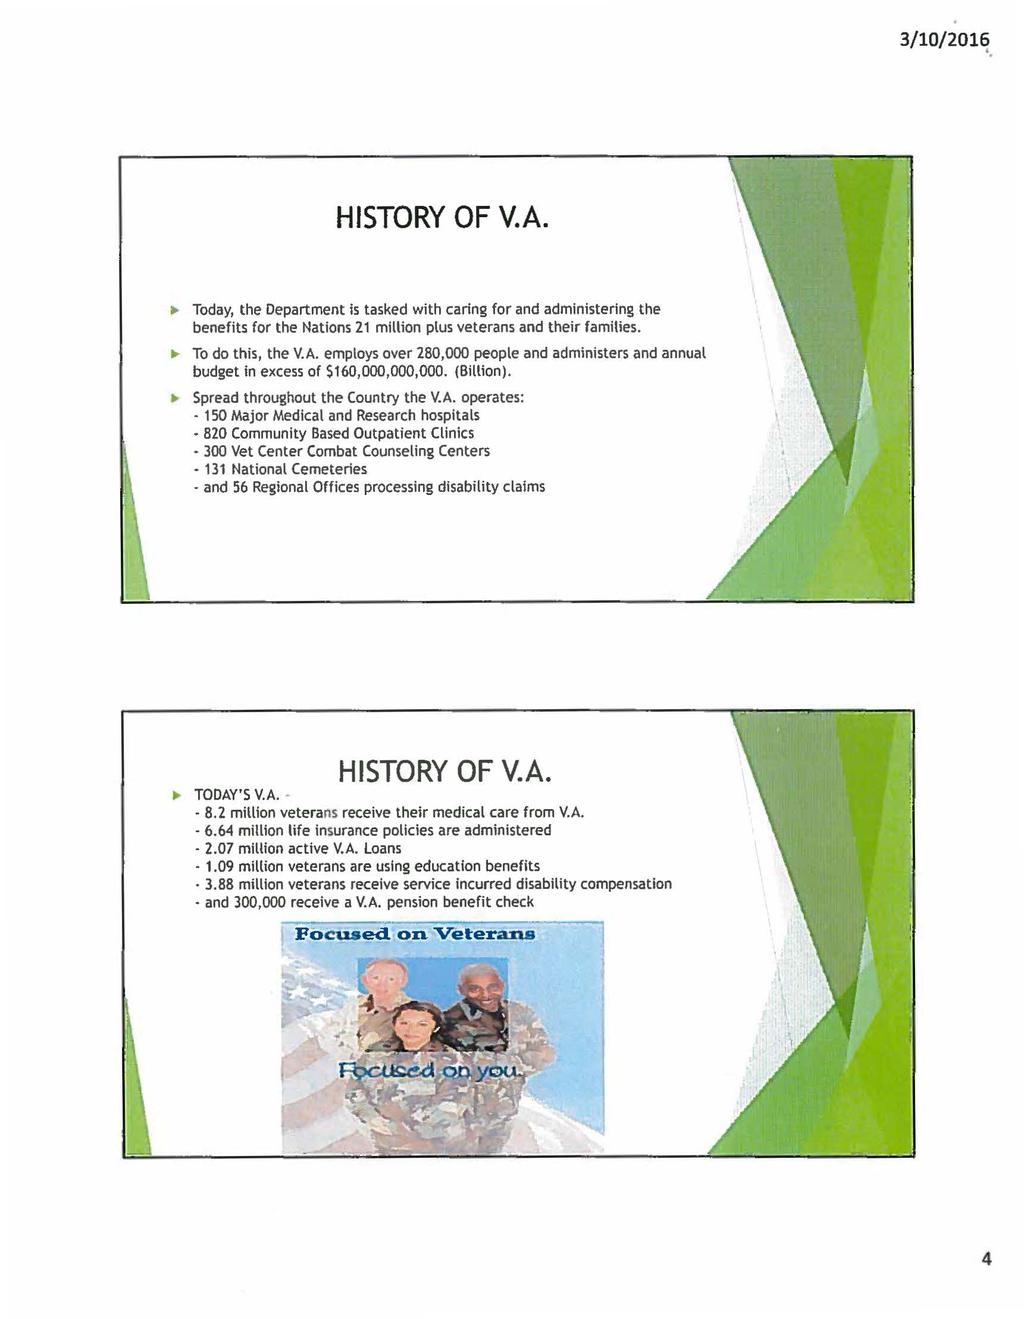 3/10/2016 ' HISTORY OF V.A... Today, the Department is tasked with caring for and administering the benefits for the Nations 21 million plus veterans and their families... To do this, the V.A. employs over 280,000 people and administers and annual budget in excess of S160,000,000,000.